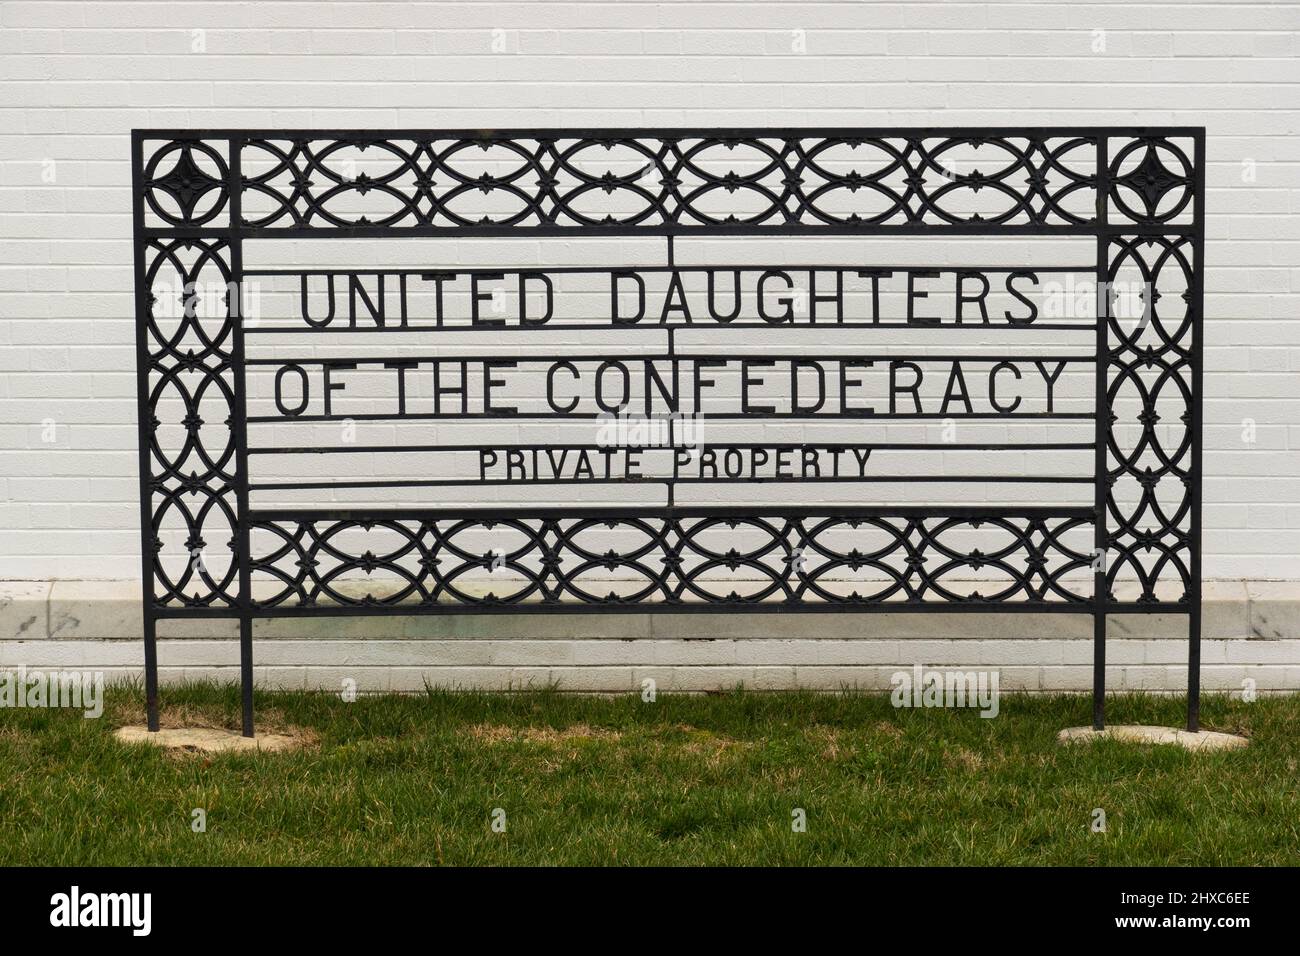 United Daughters of the Confederacy sign in Richmond Virginia Stock Photo